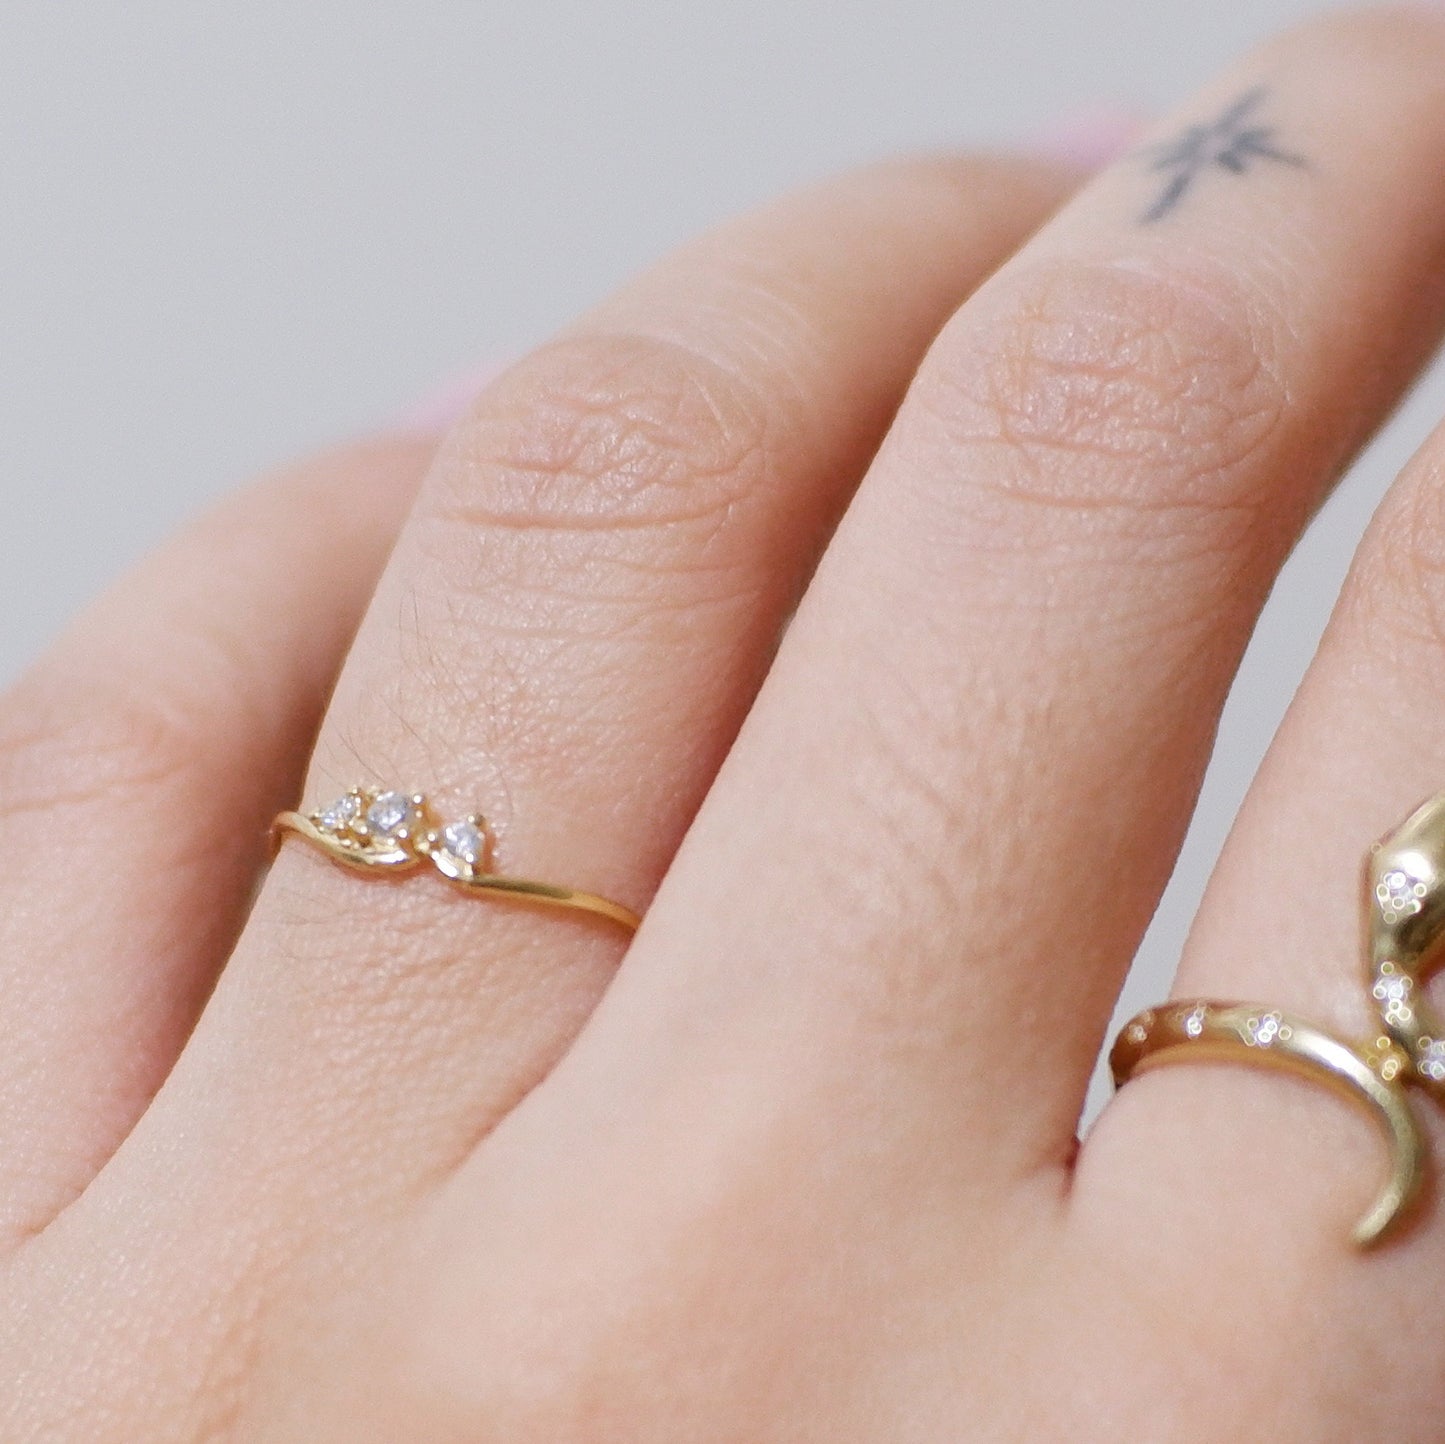 The Trio Ring in Solid Gold